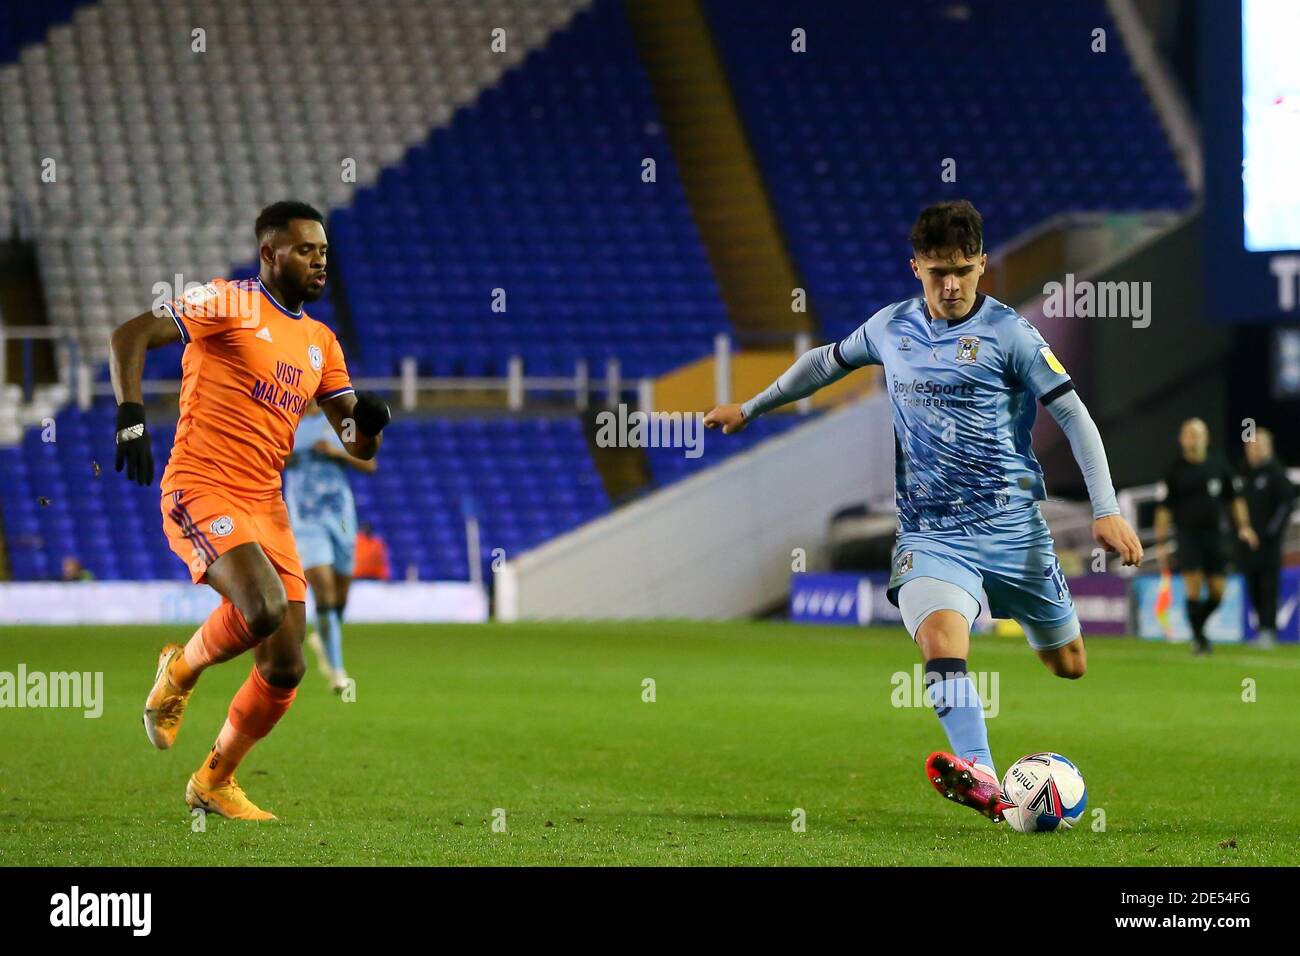 Ryan Giles #18 of Coventry City crosses the ball Stock Photo